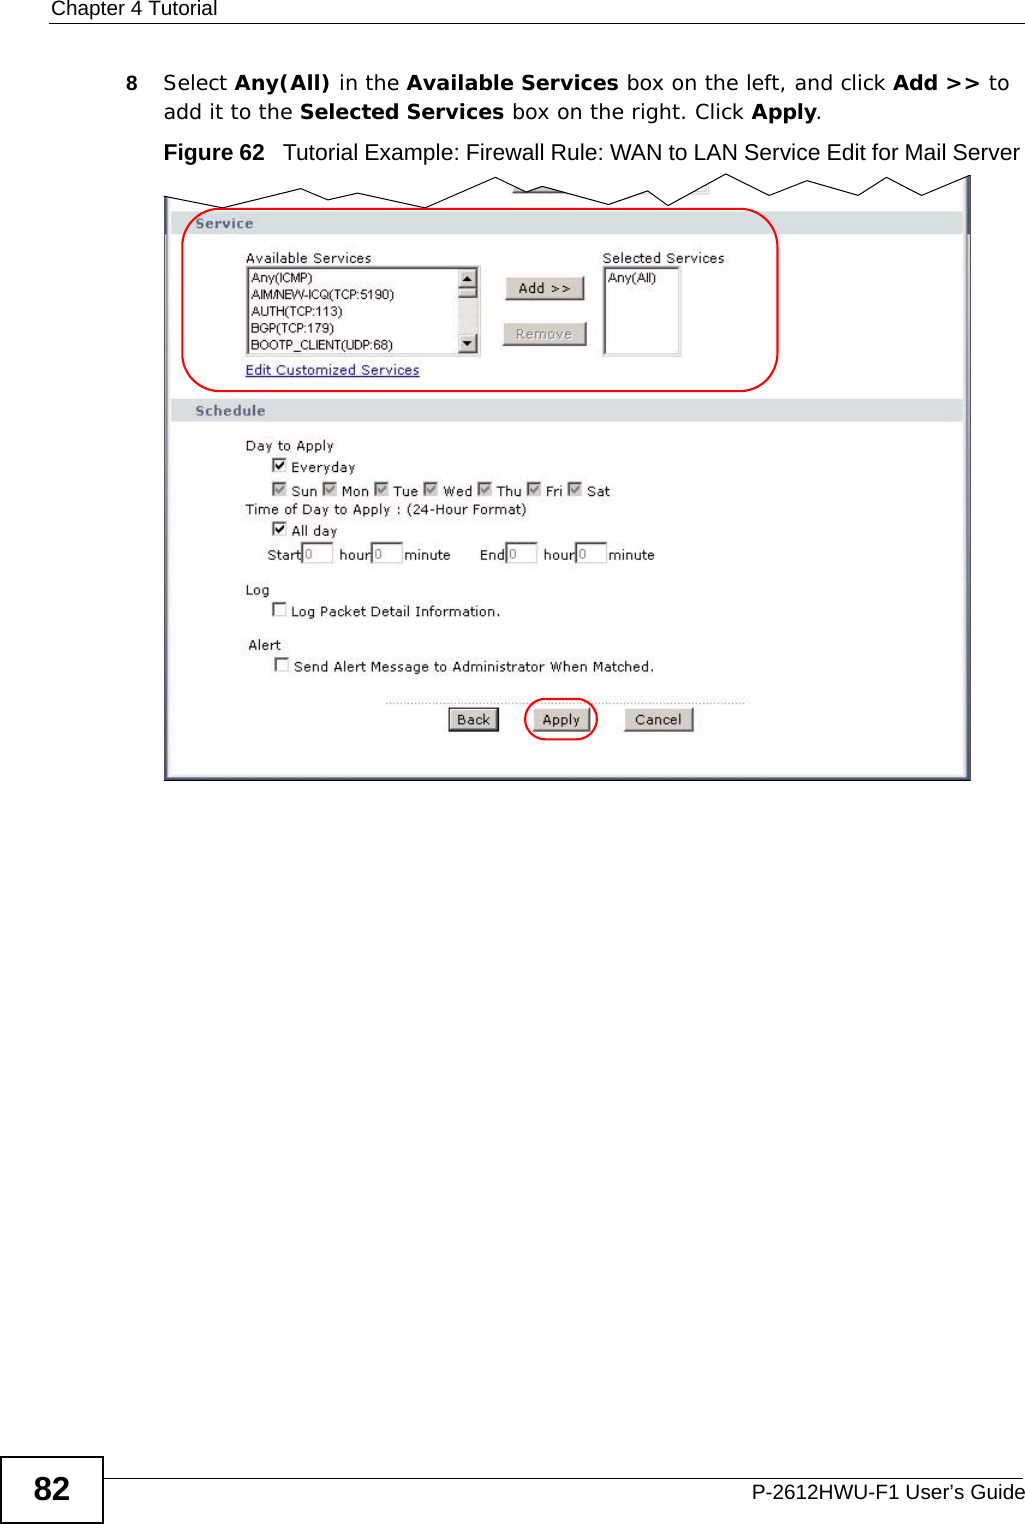 Chapter 4 TutorialP-2612HWU-F1 User’s Guide828Select Any(All) in the Available Services box on the left, and click Add &gt;&gt; to add it to the Selected Services box on the right. Click Apply.Figure 62   Tutorial Example: Firewall Rule: WAN to LAN Service Edit for Mail Server 